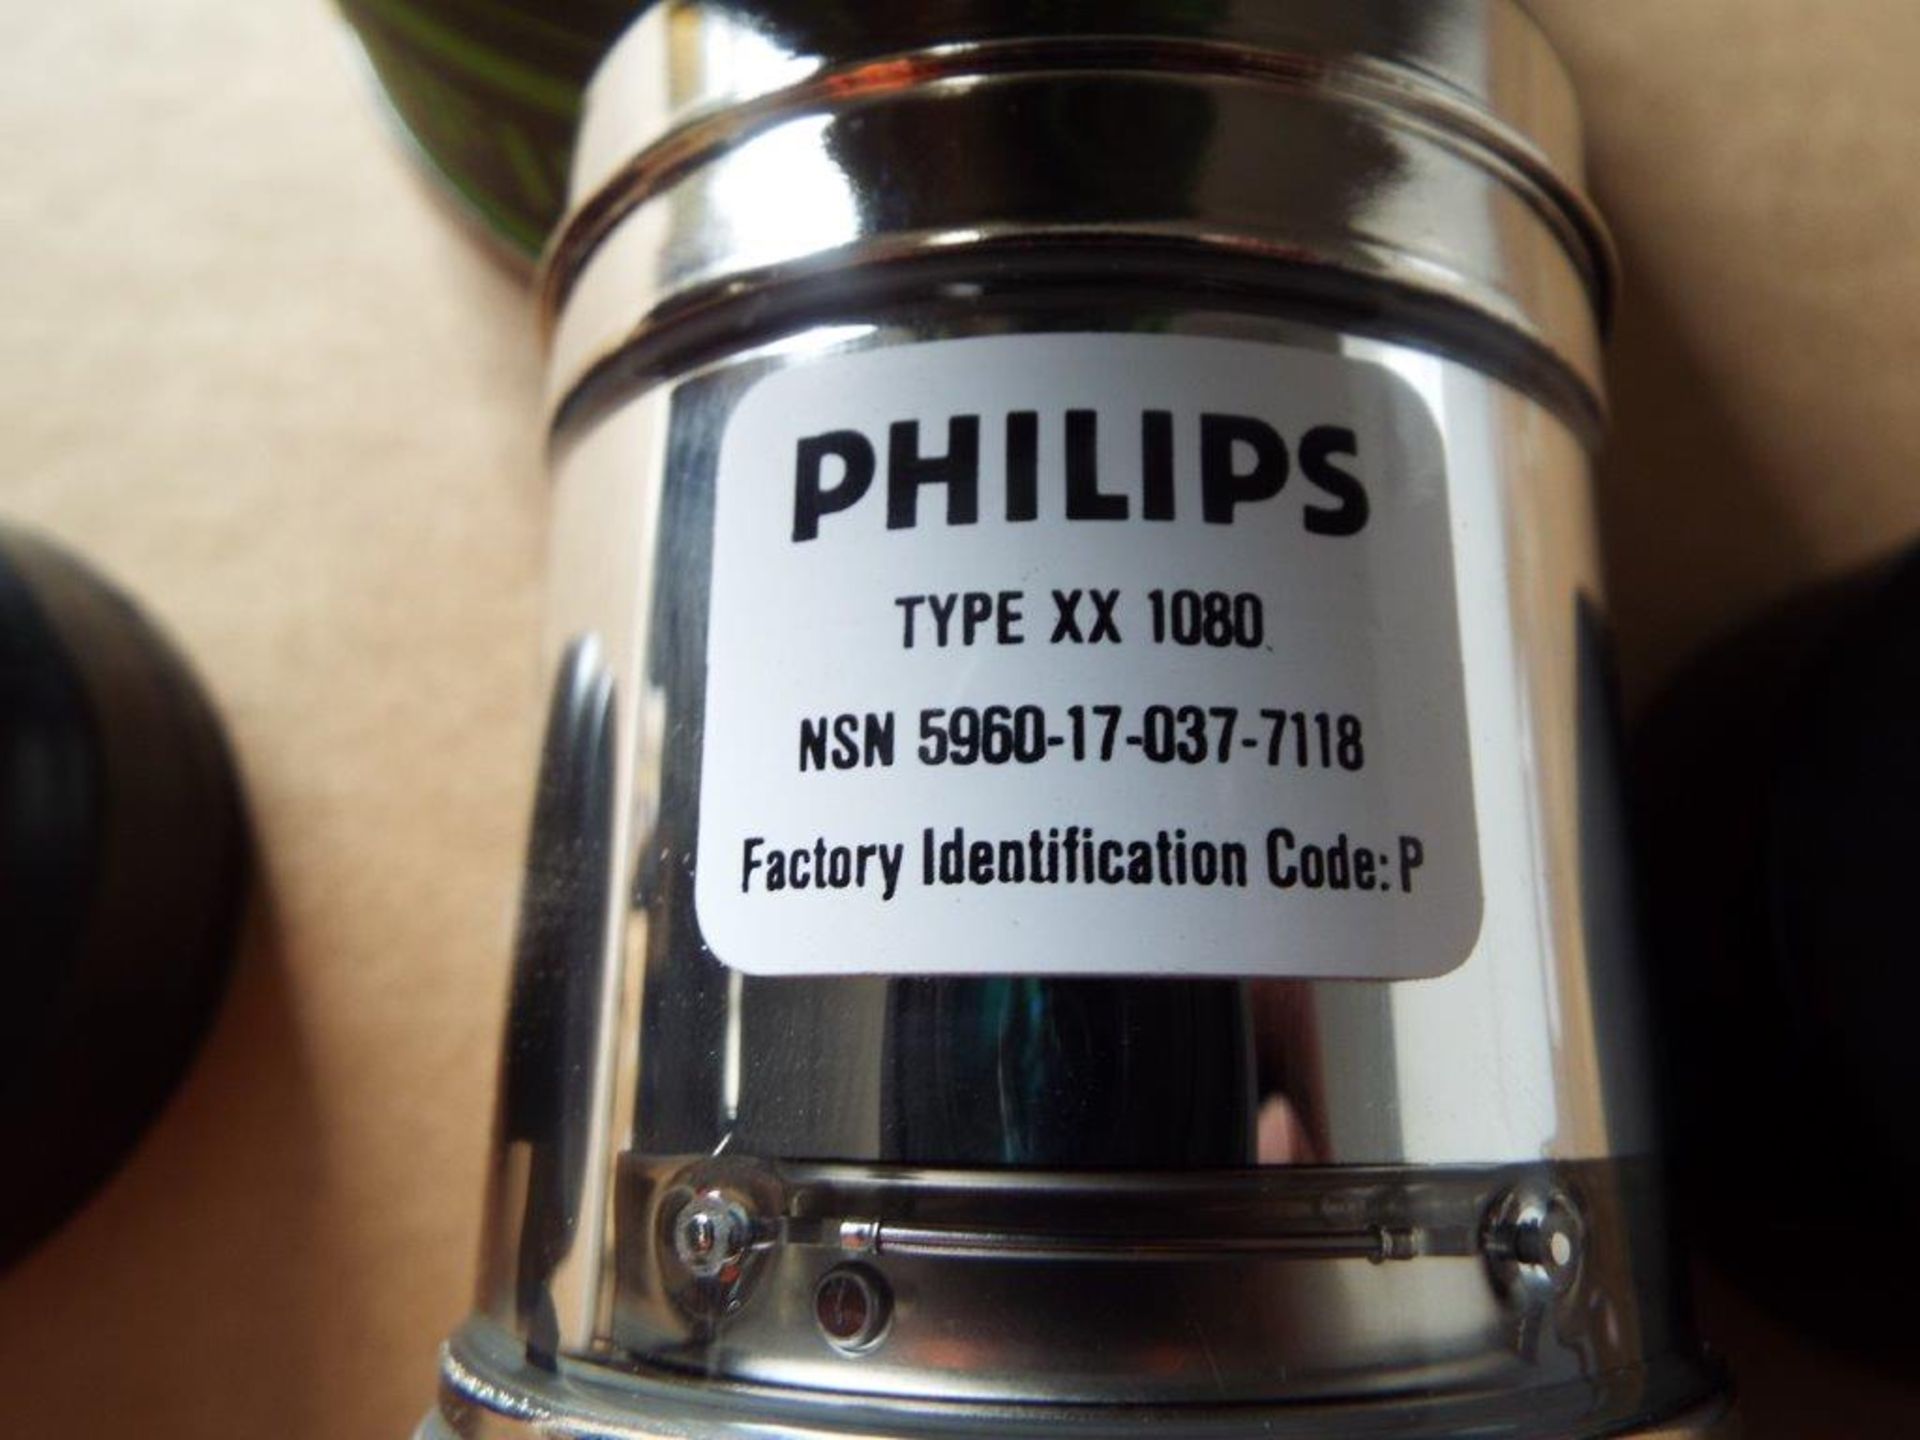 5 x Philips Type XX 1080 Image Intensifier / Night Vision Tubes - Image 3 of 7